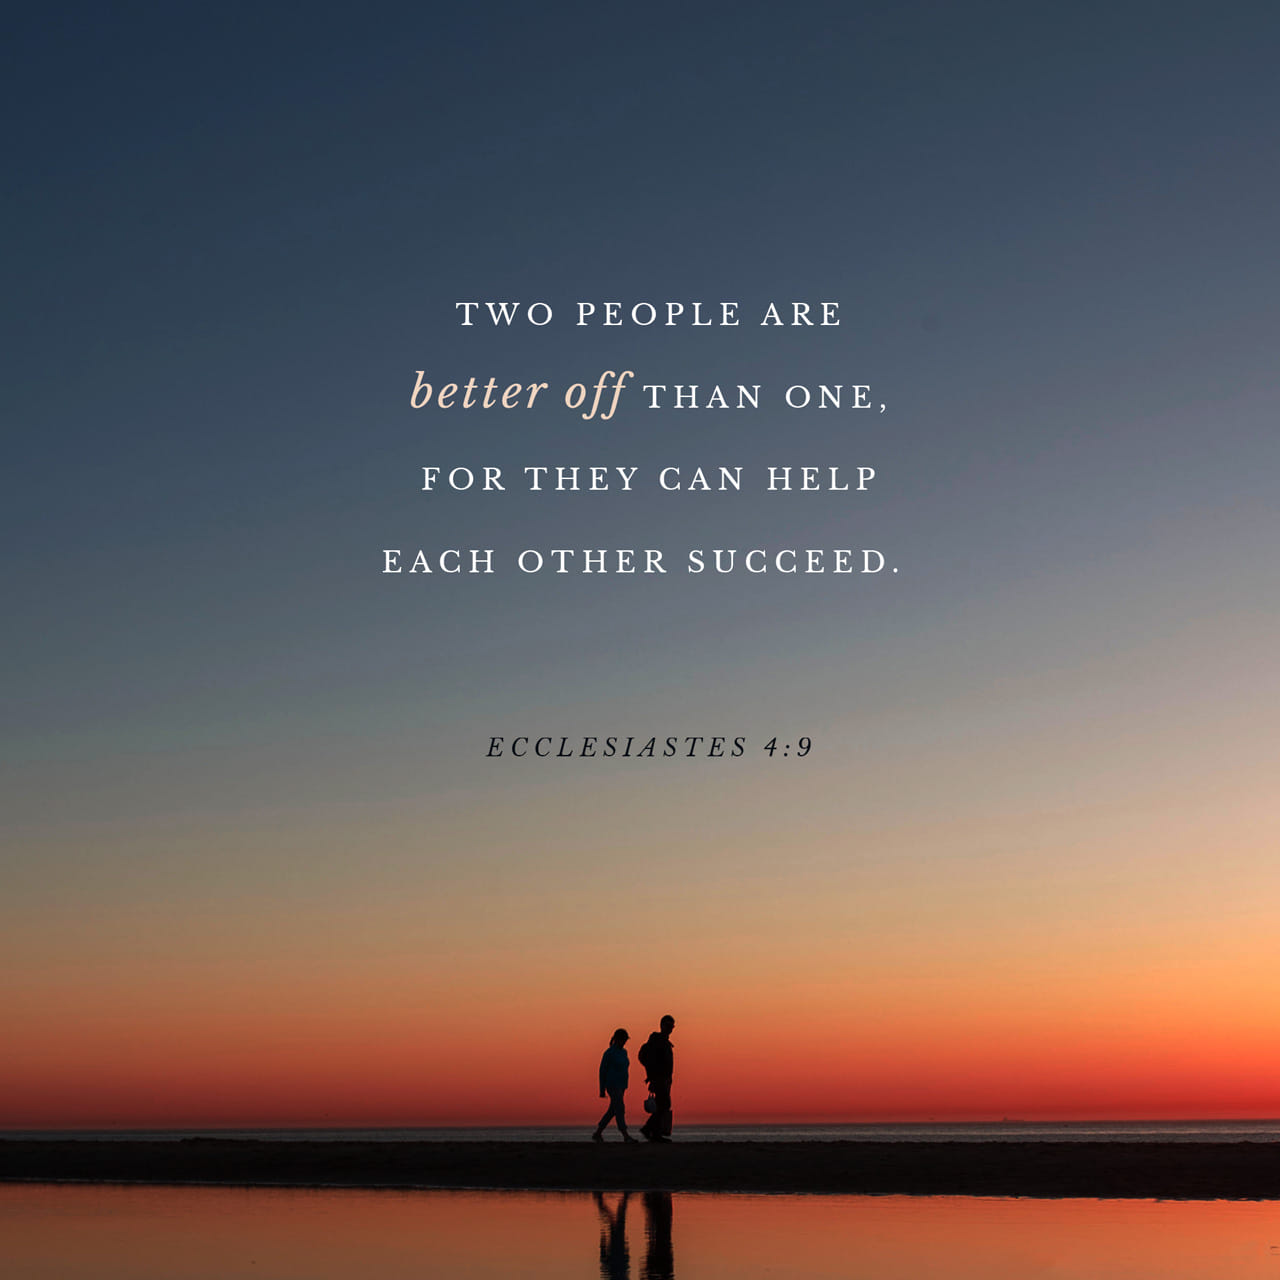 Because two is better than one! - Rediff.com